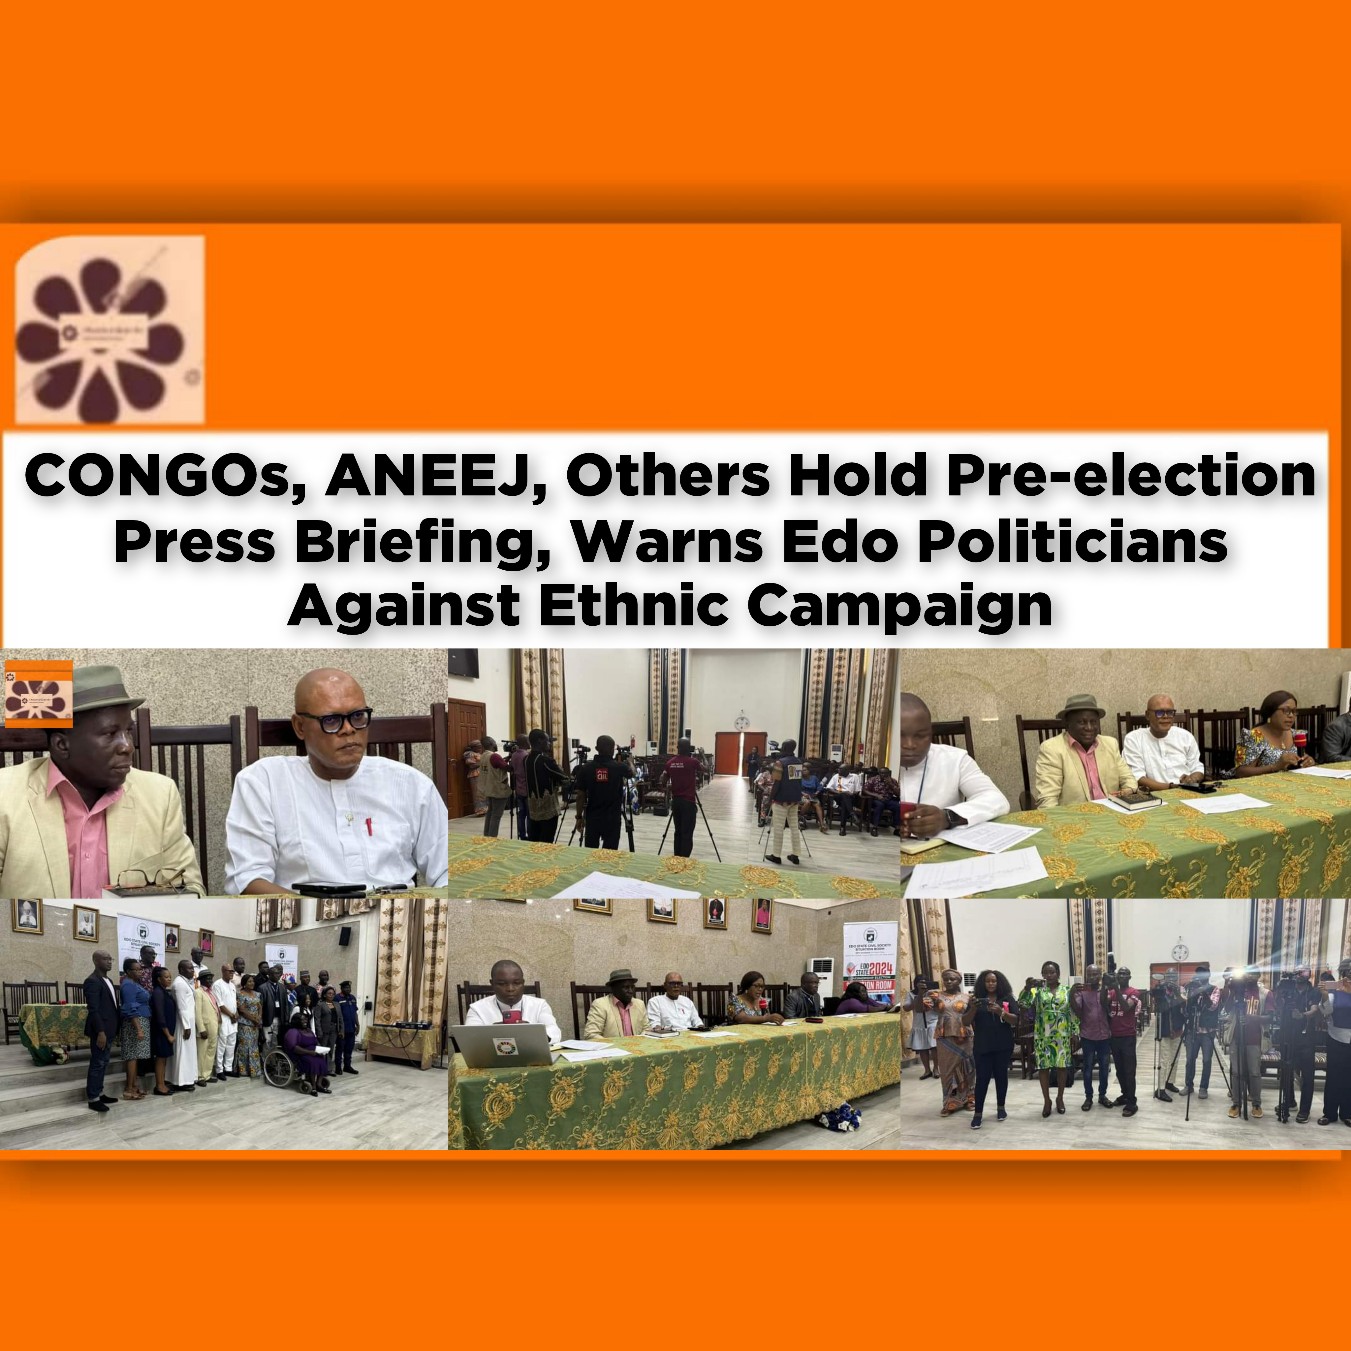 CONGOs, ANEEJ, Others Hold Pre-election Press Briefing, Warns Edo Politicians Against Ethnic Campaign ~ OsazuwaAkonedo #Goodwin